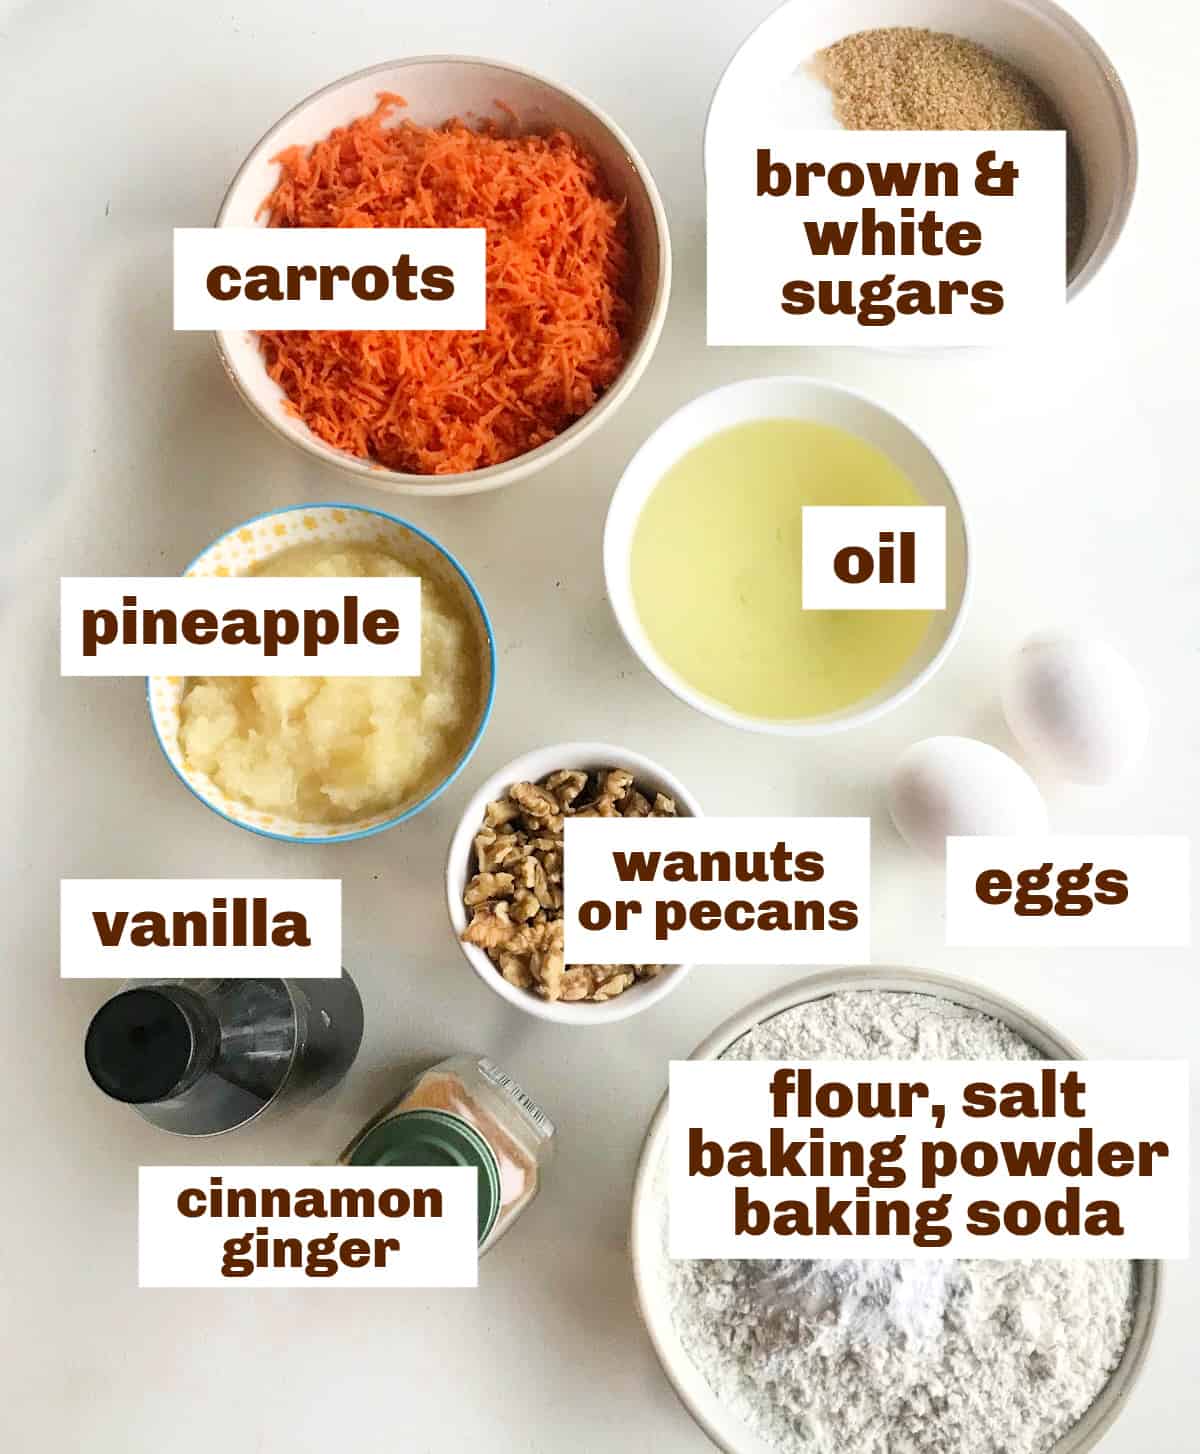 Bowls with carrot pineapple cake ingredients on a white table, image with text